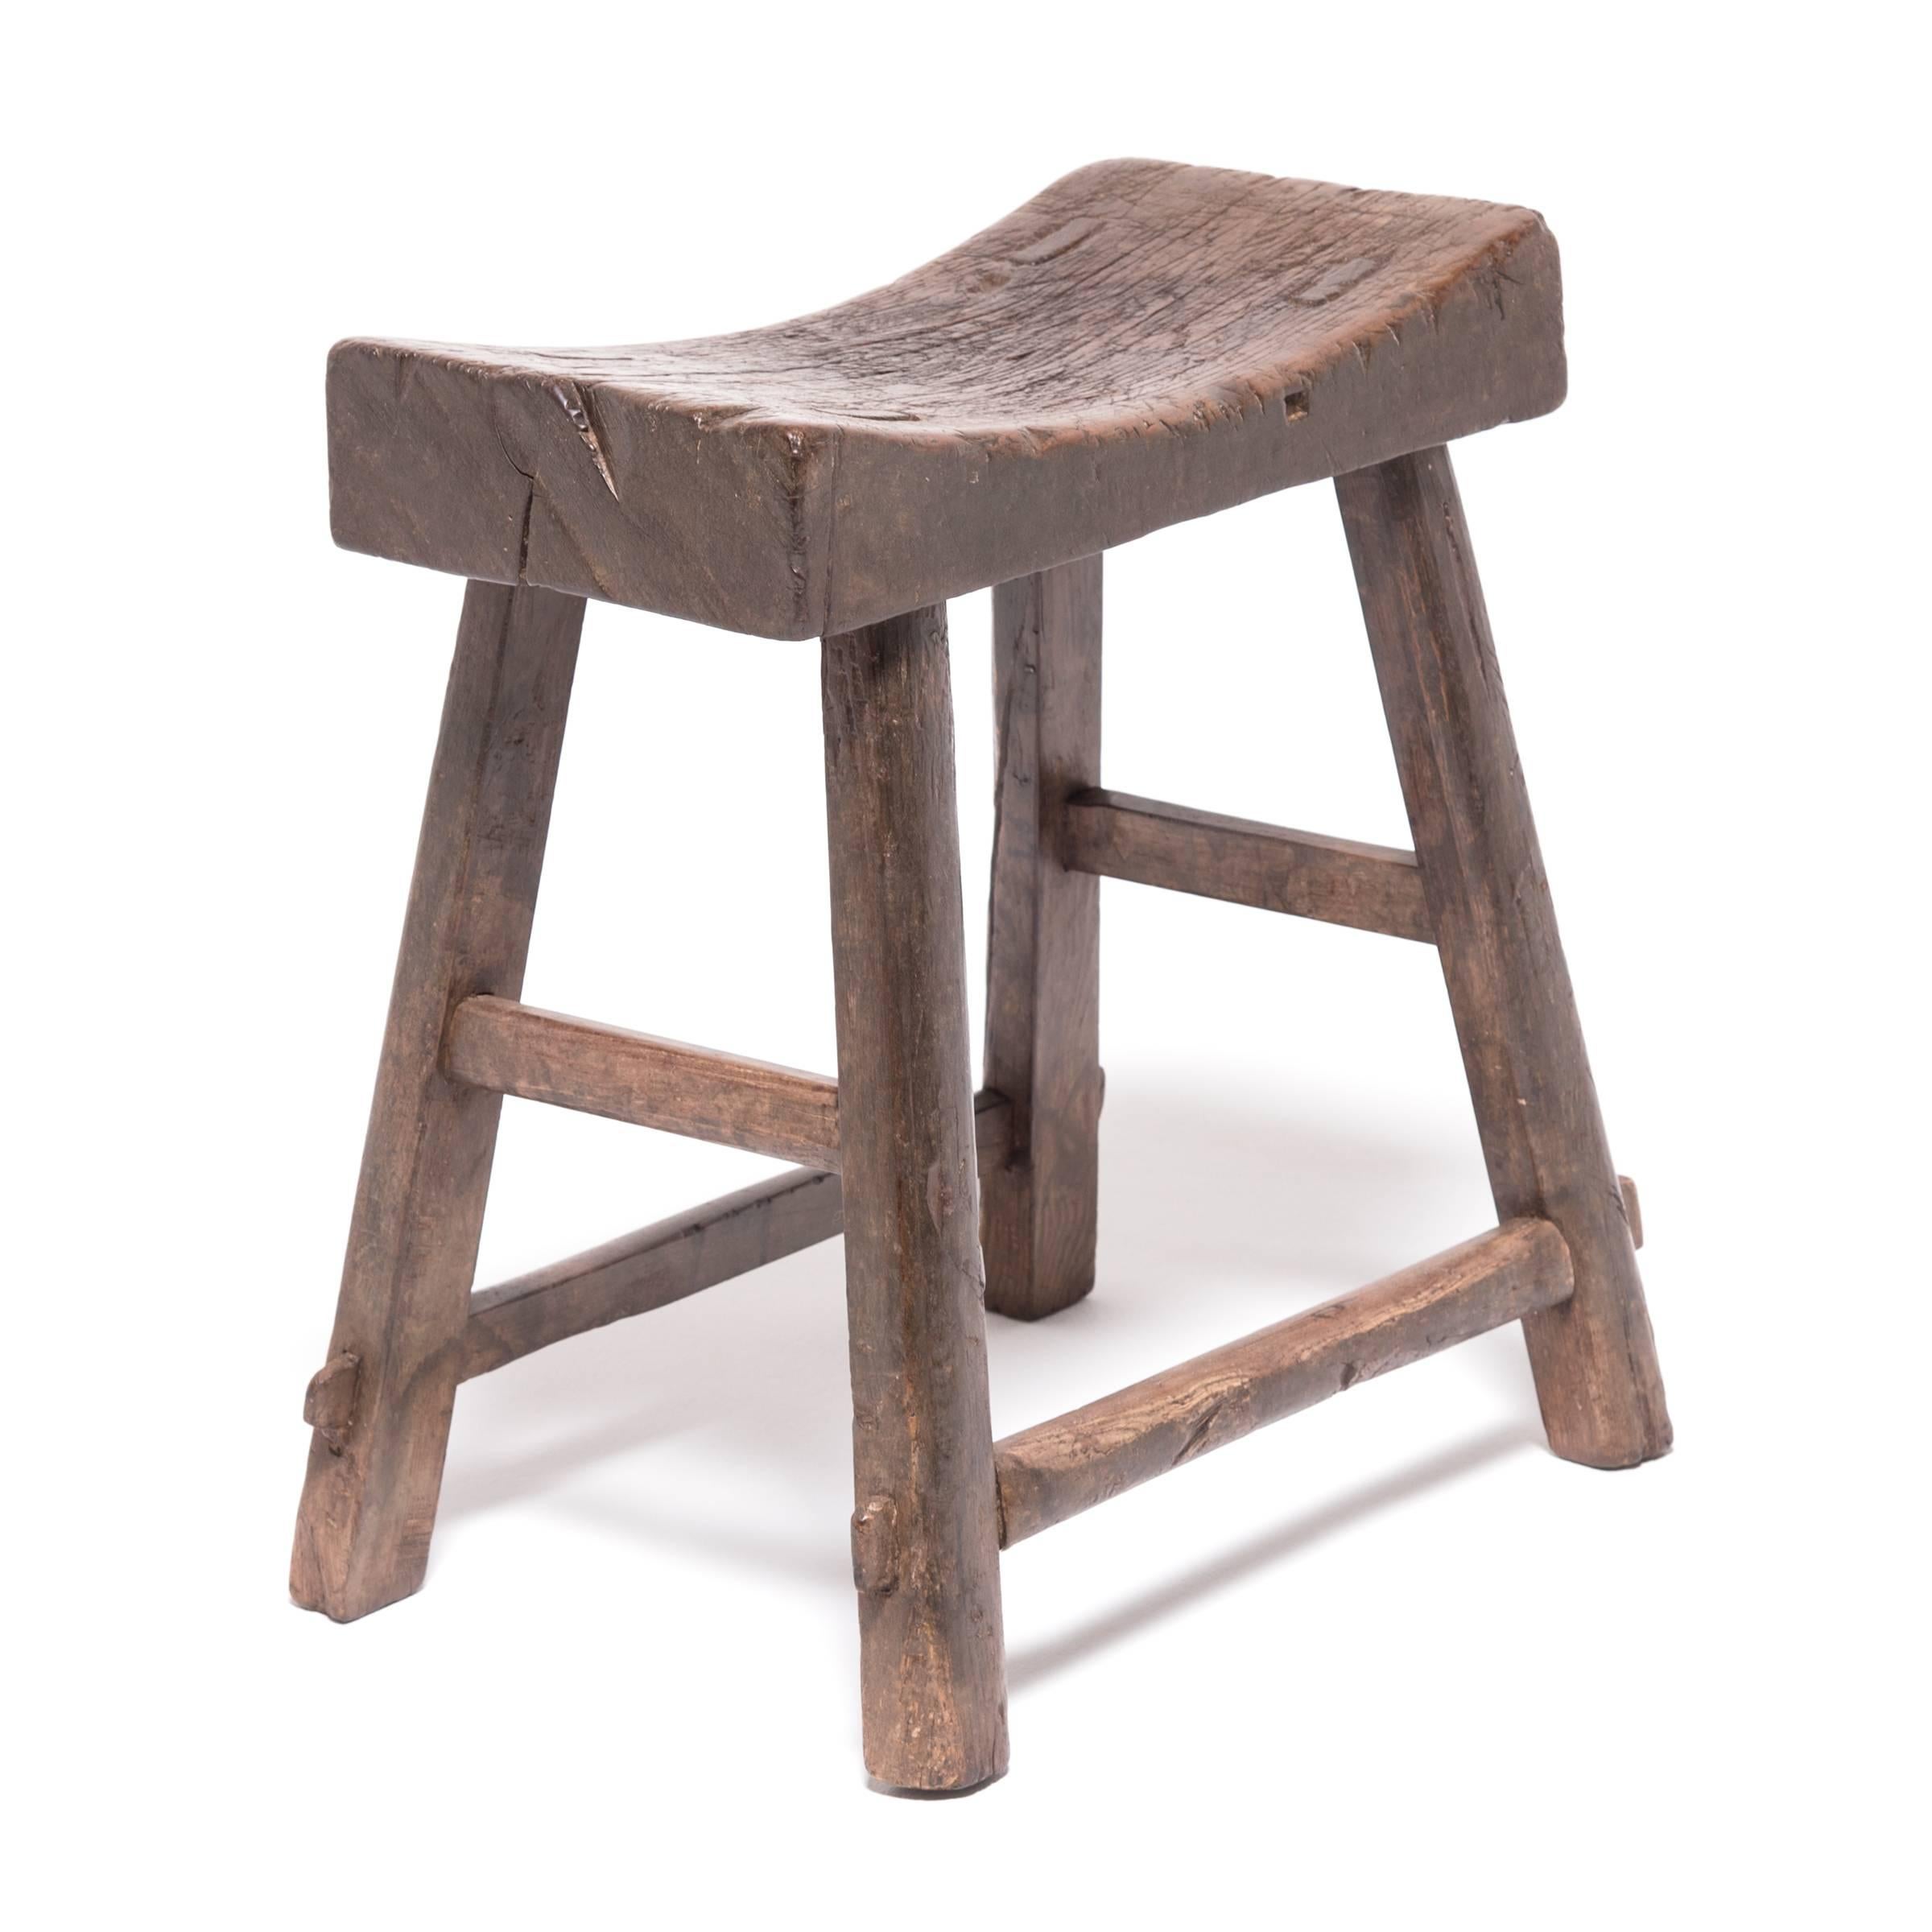 Dynamic and fluid, this Qing-dynasty stool shapes a crescent-curved seat supported by a network of angle legs and horizontal stretcher bars. Made of northern elmwood, the simple yet sculptural stool has aged beautifully with rich character and great